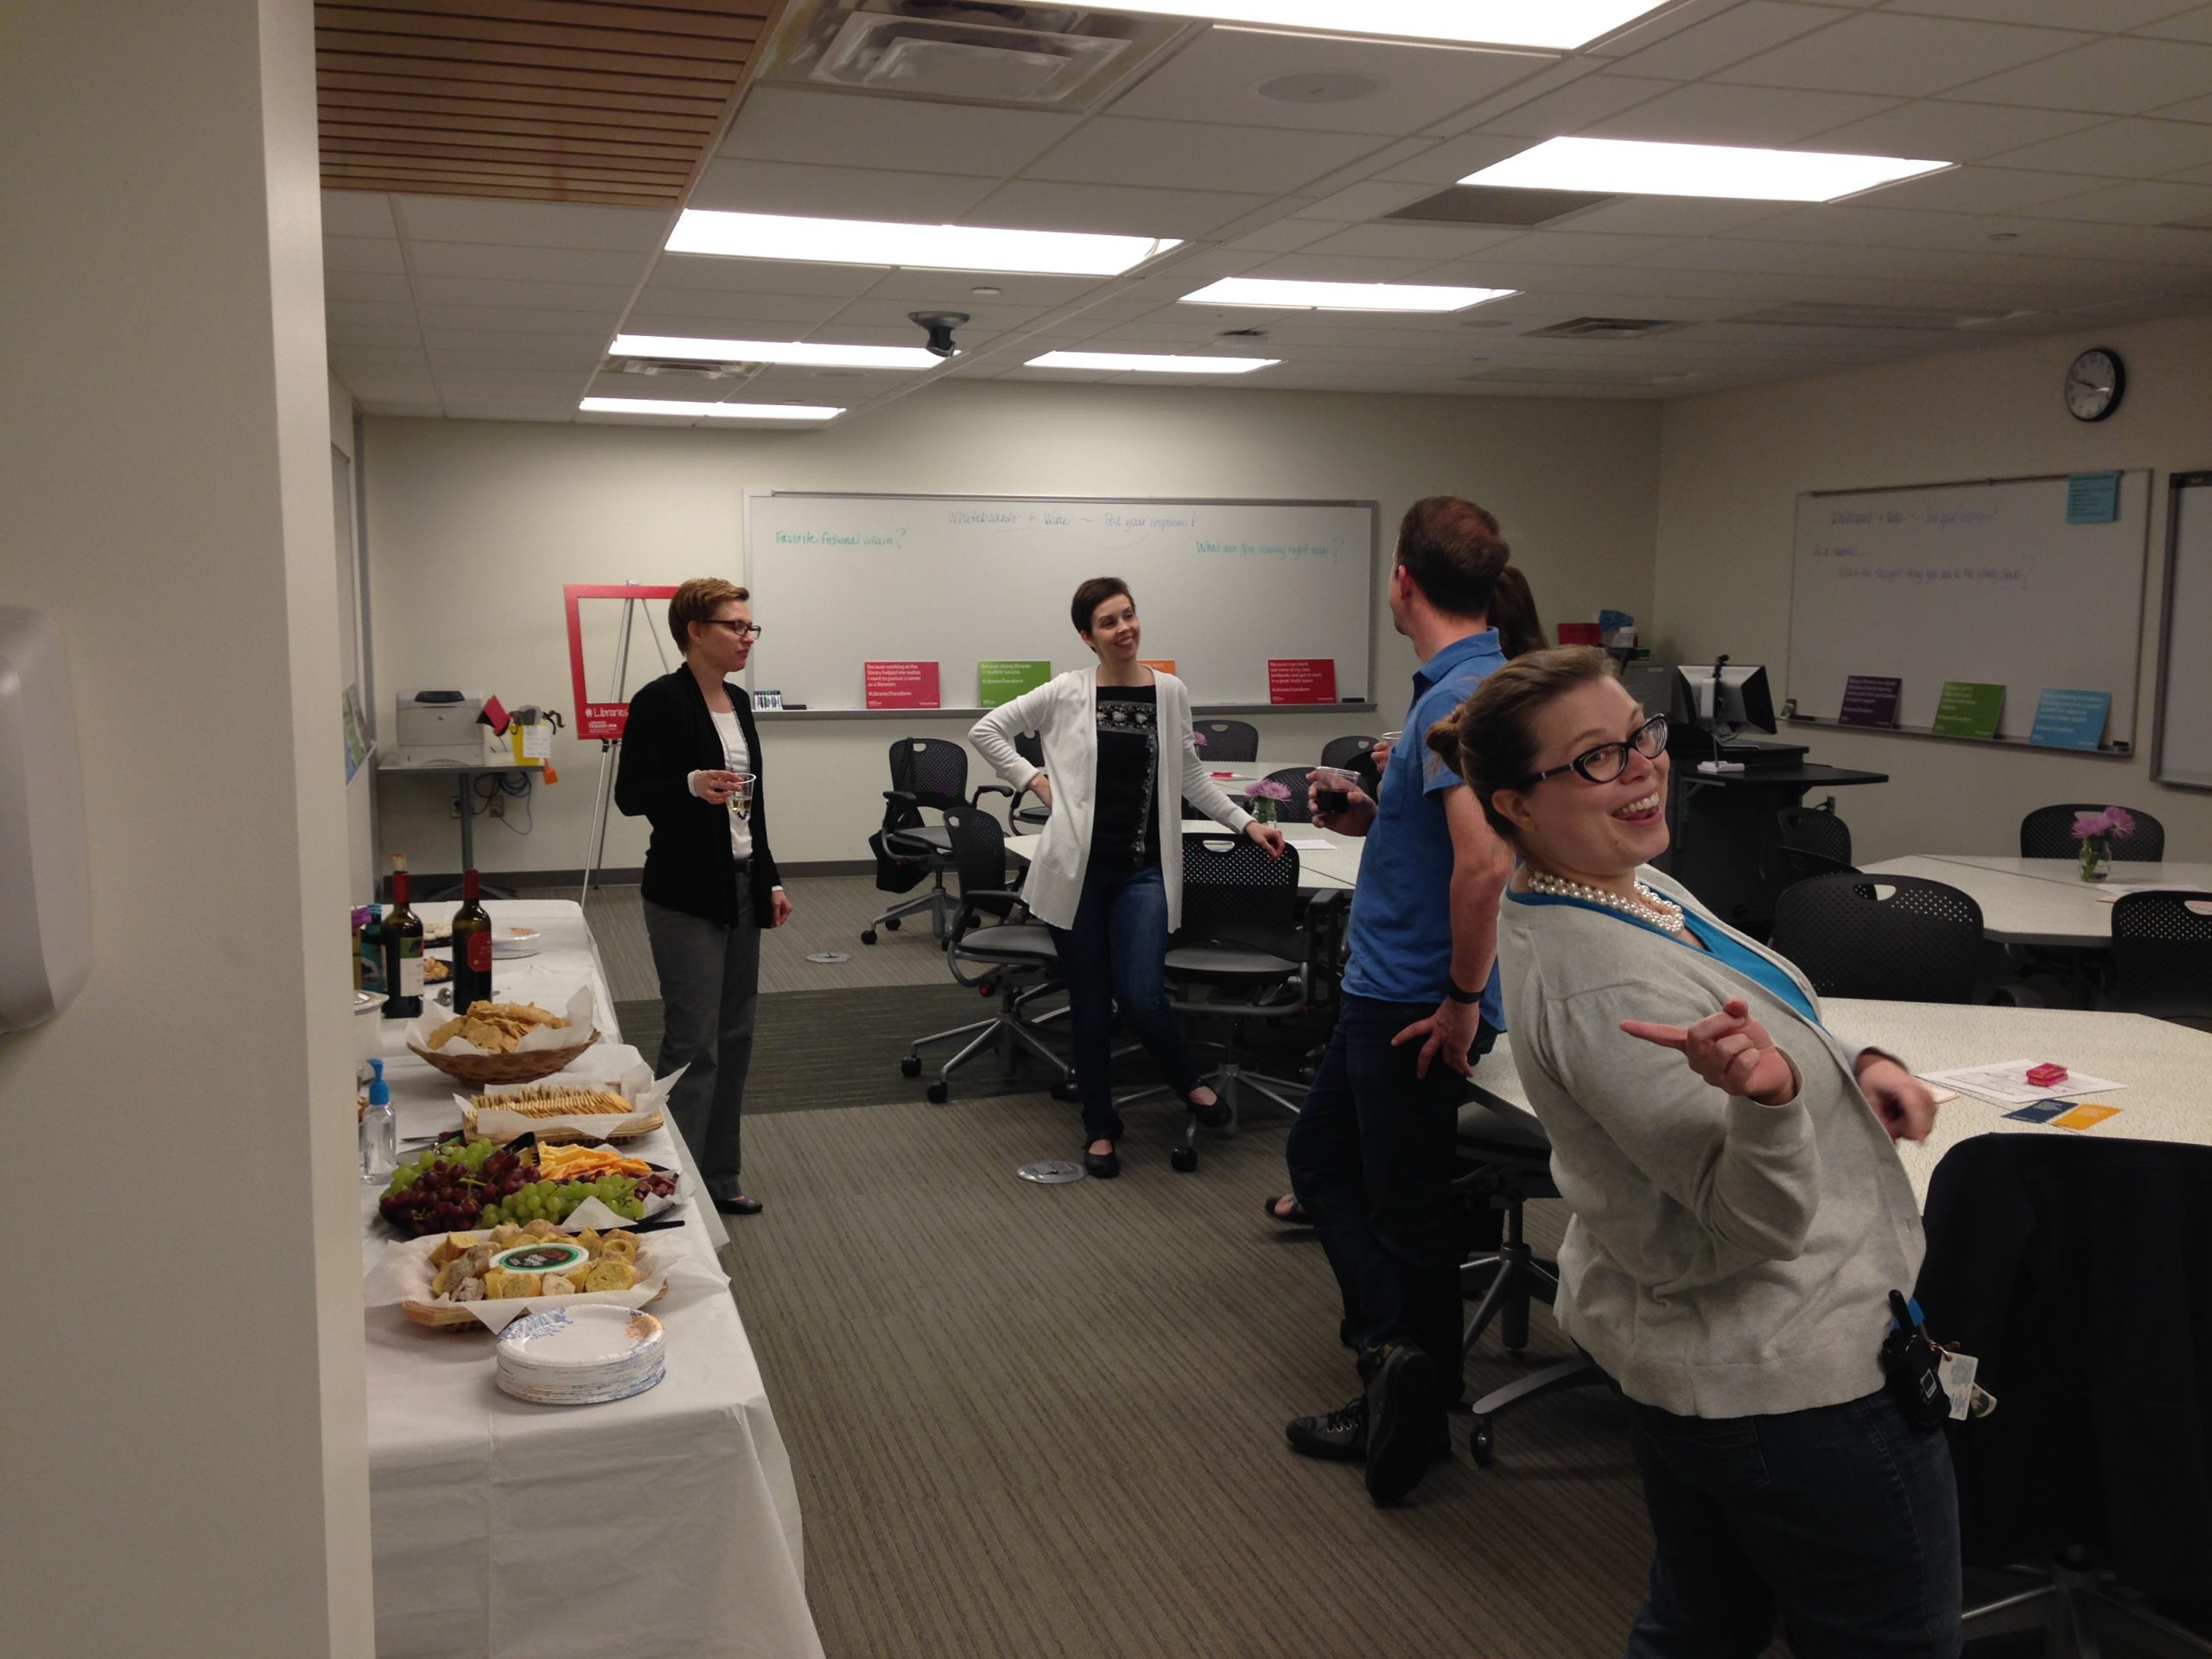 UCBA colleagues standing and socializing over snacks